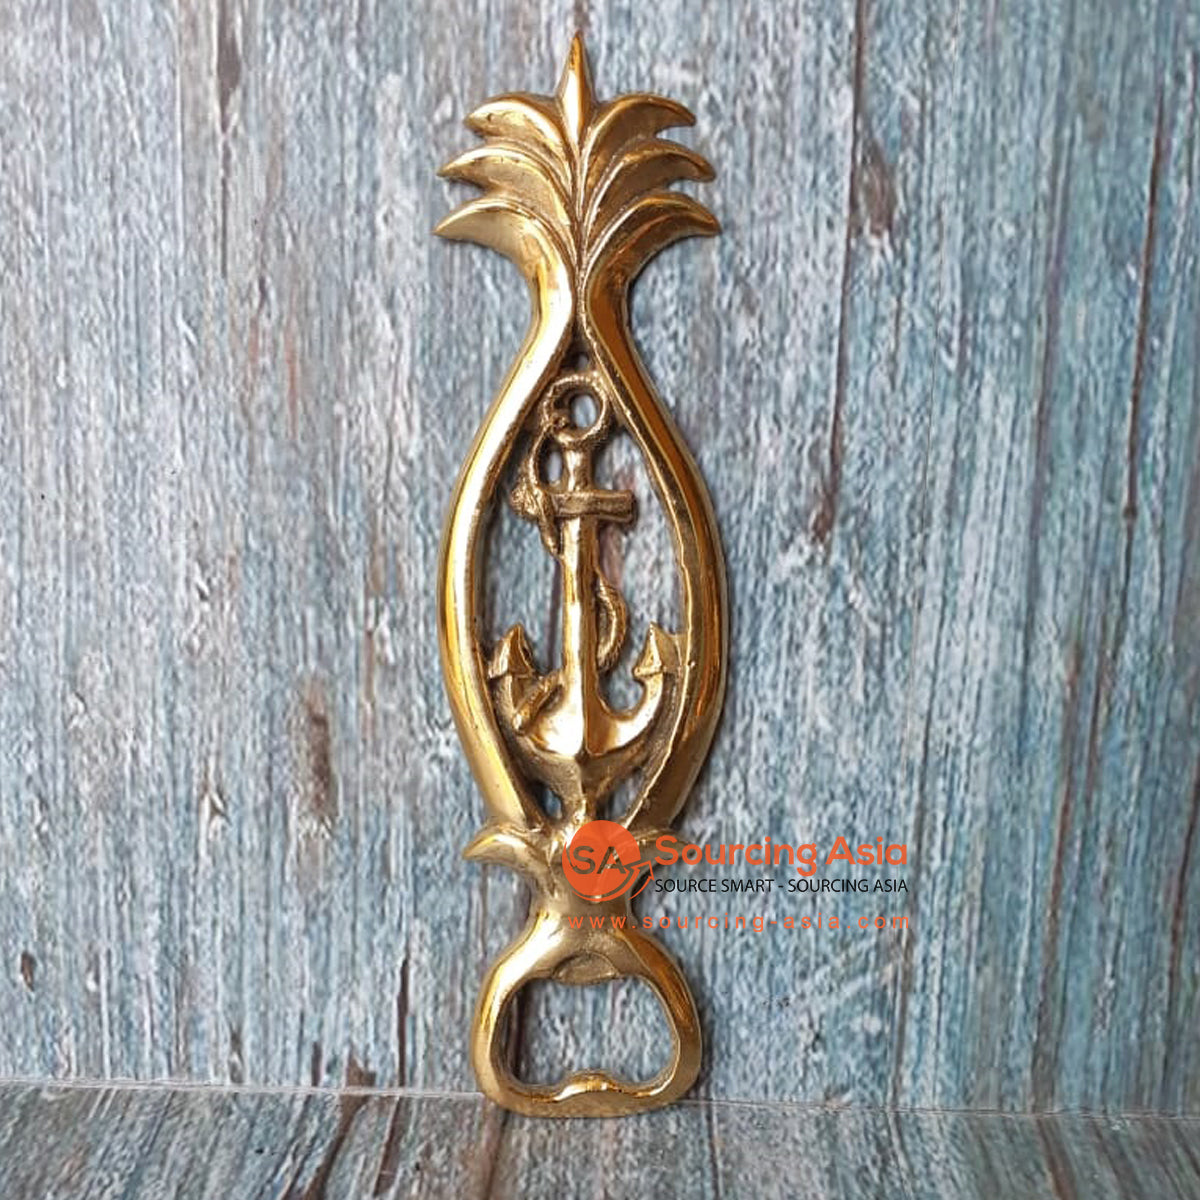 GB178 BRASS PINEAPPLE AND ANCHOR BOTTLE OPENER DECORATION